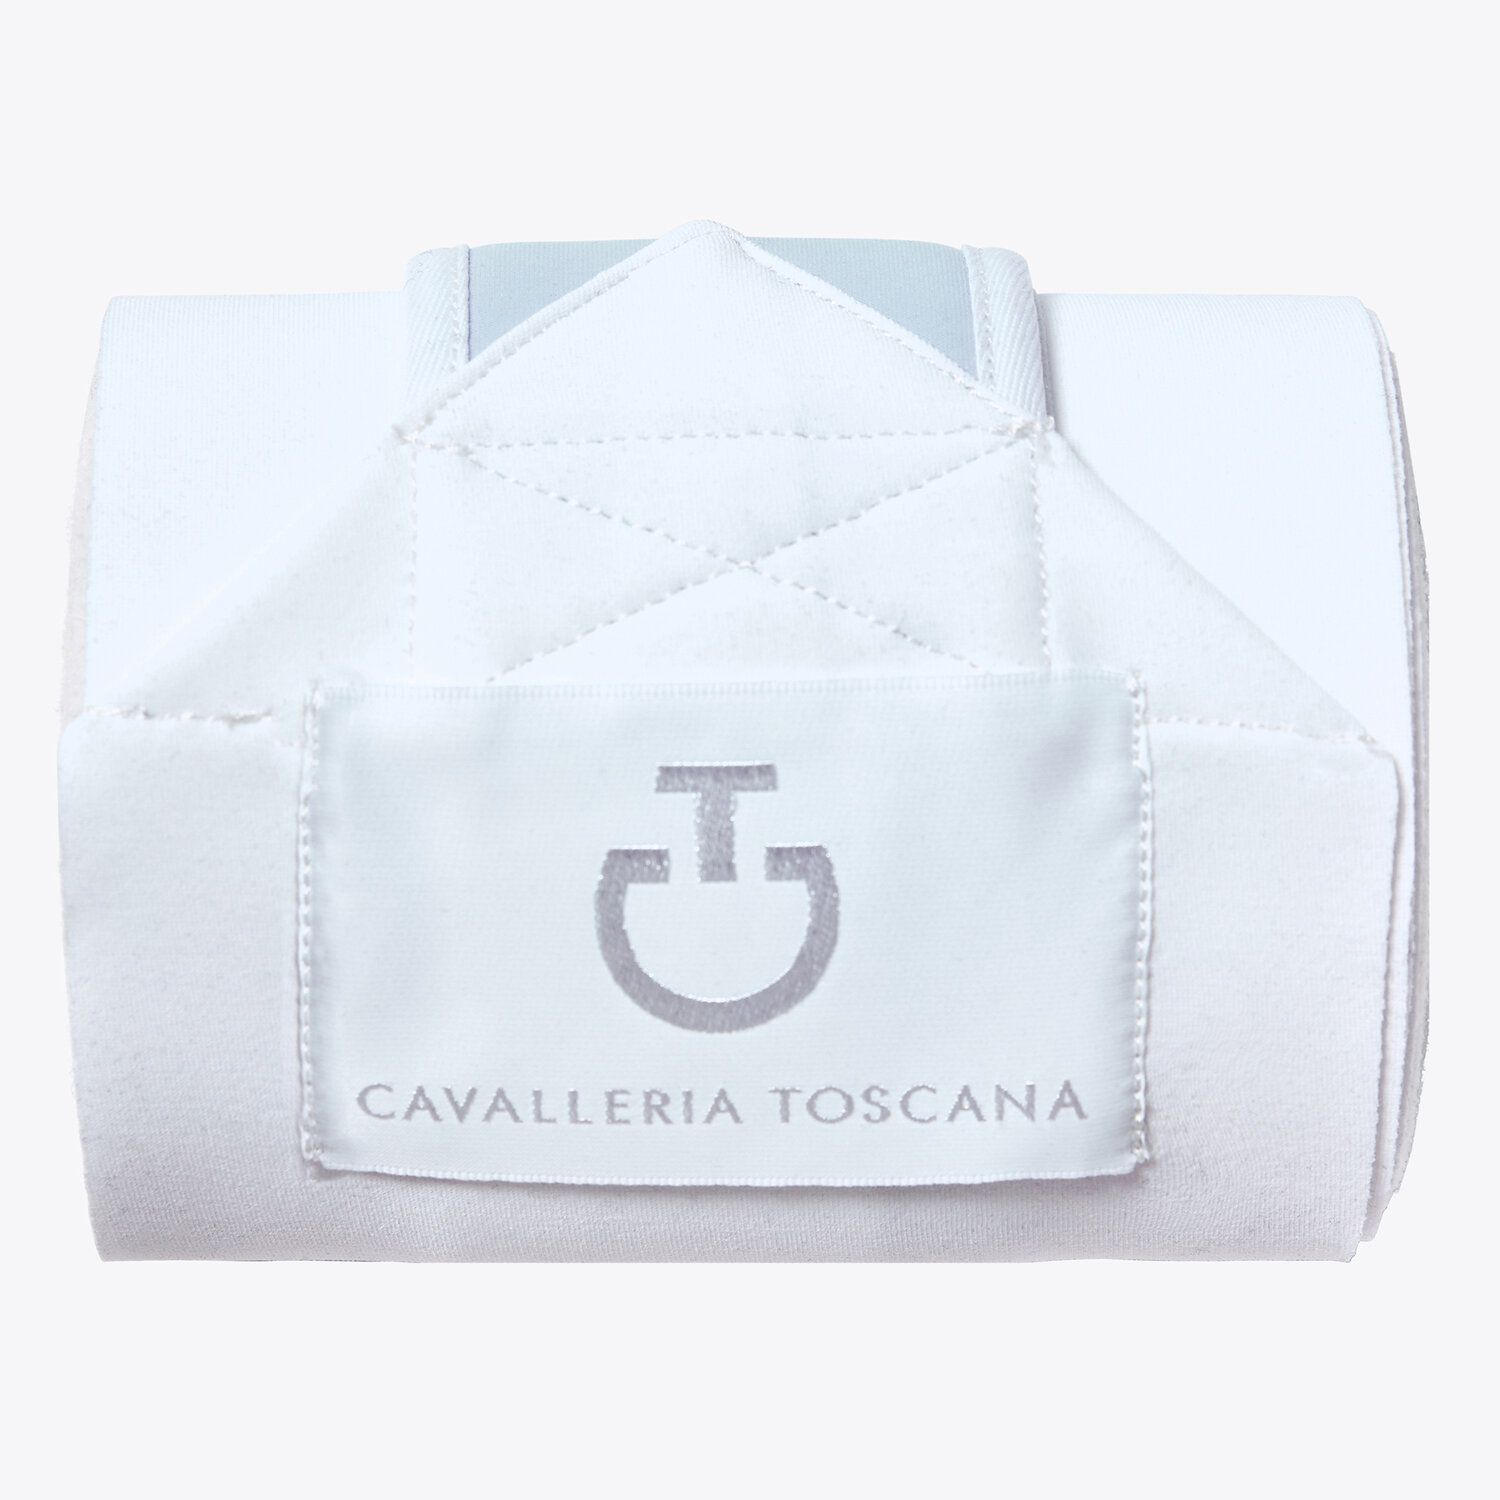 Cavalleria Toscana Set of 2 jersey and fleece bandages. WHITE / POWDER BLUE-2